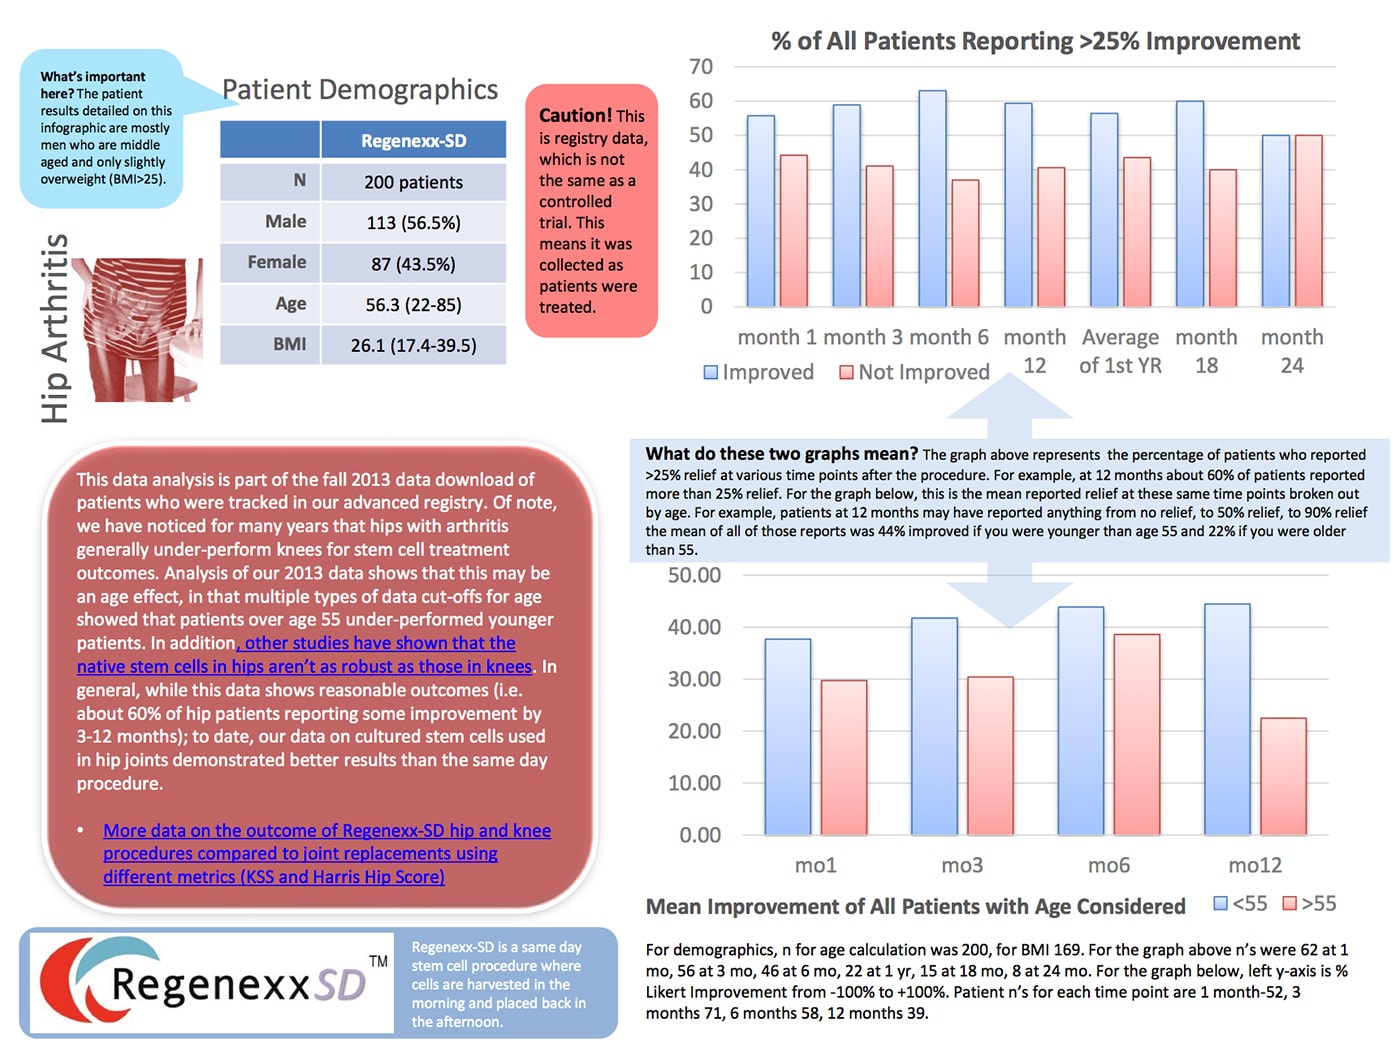 2013 Patient Outcome Data for Same Day Stem Cell Procedures